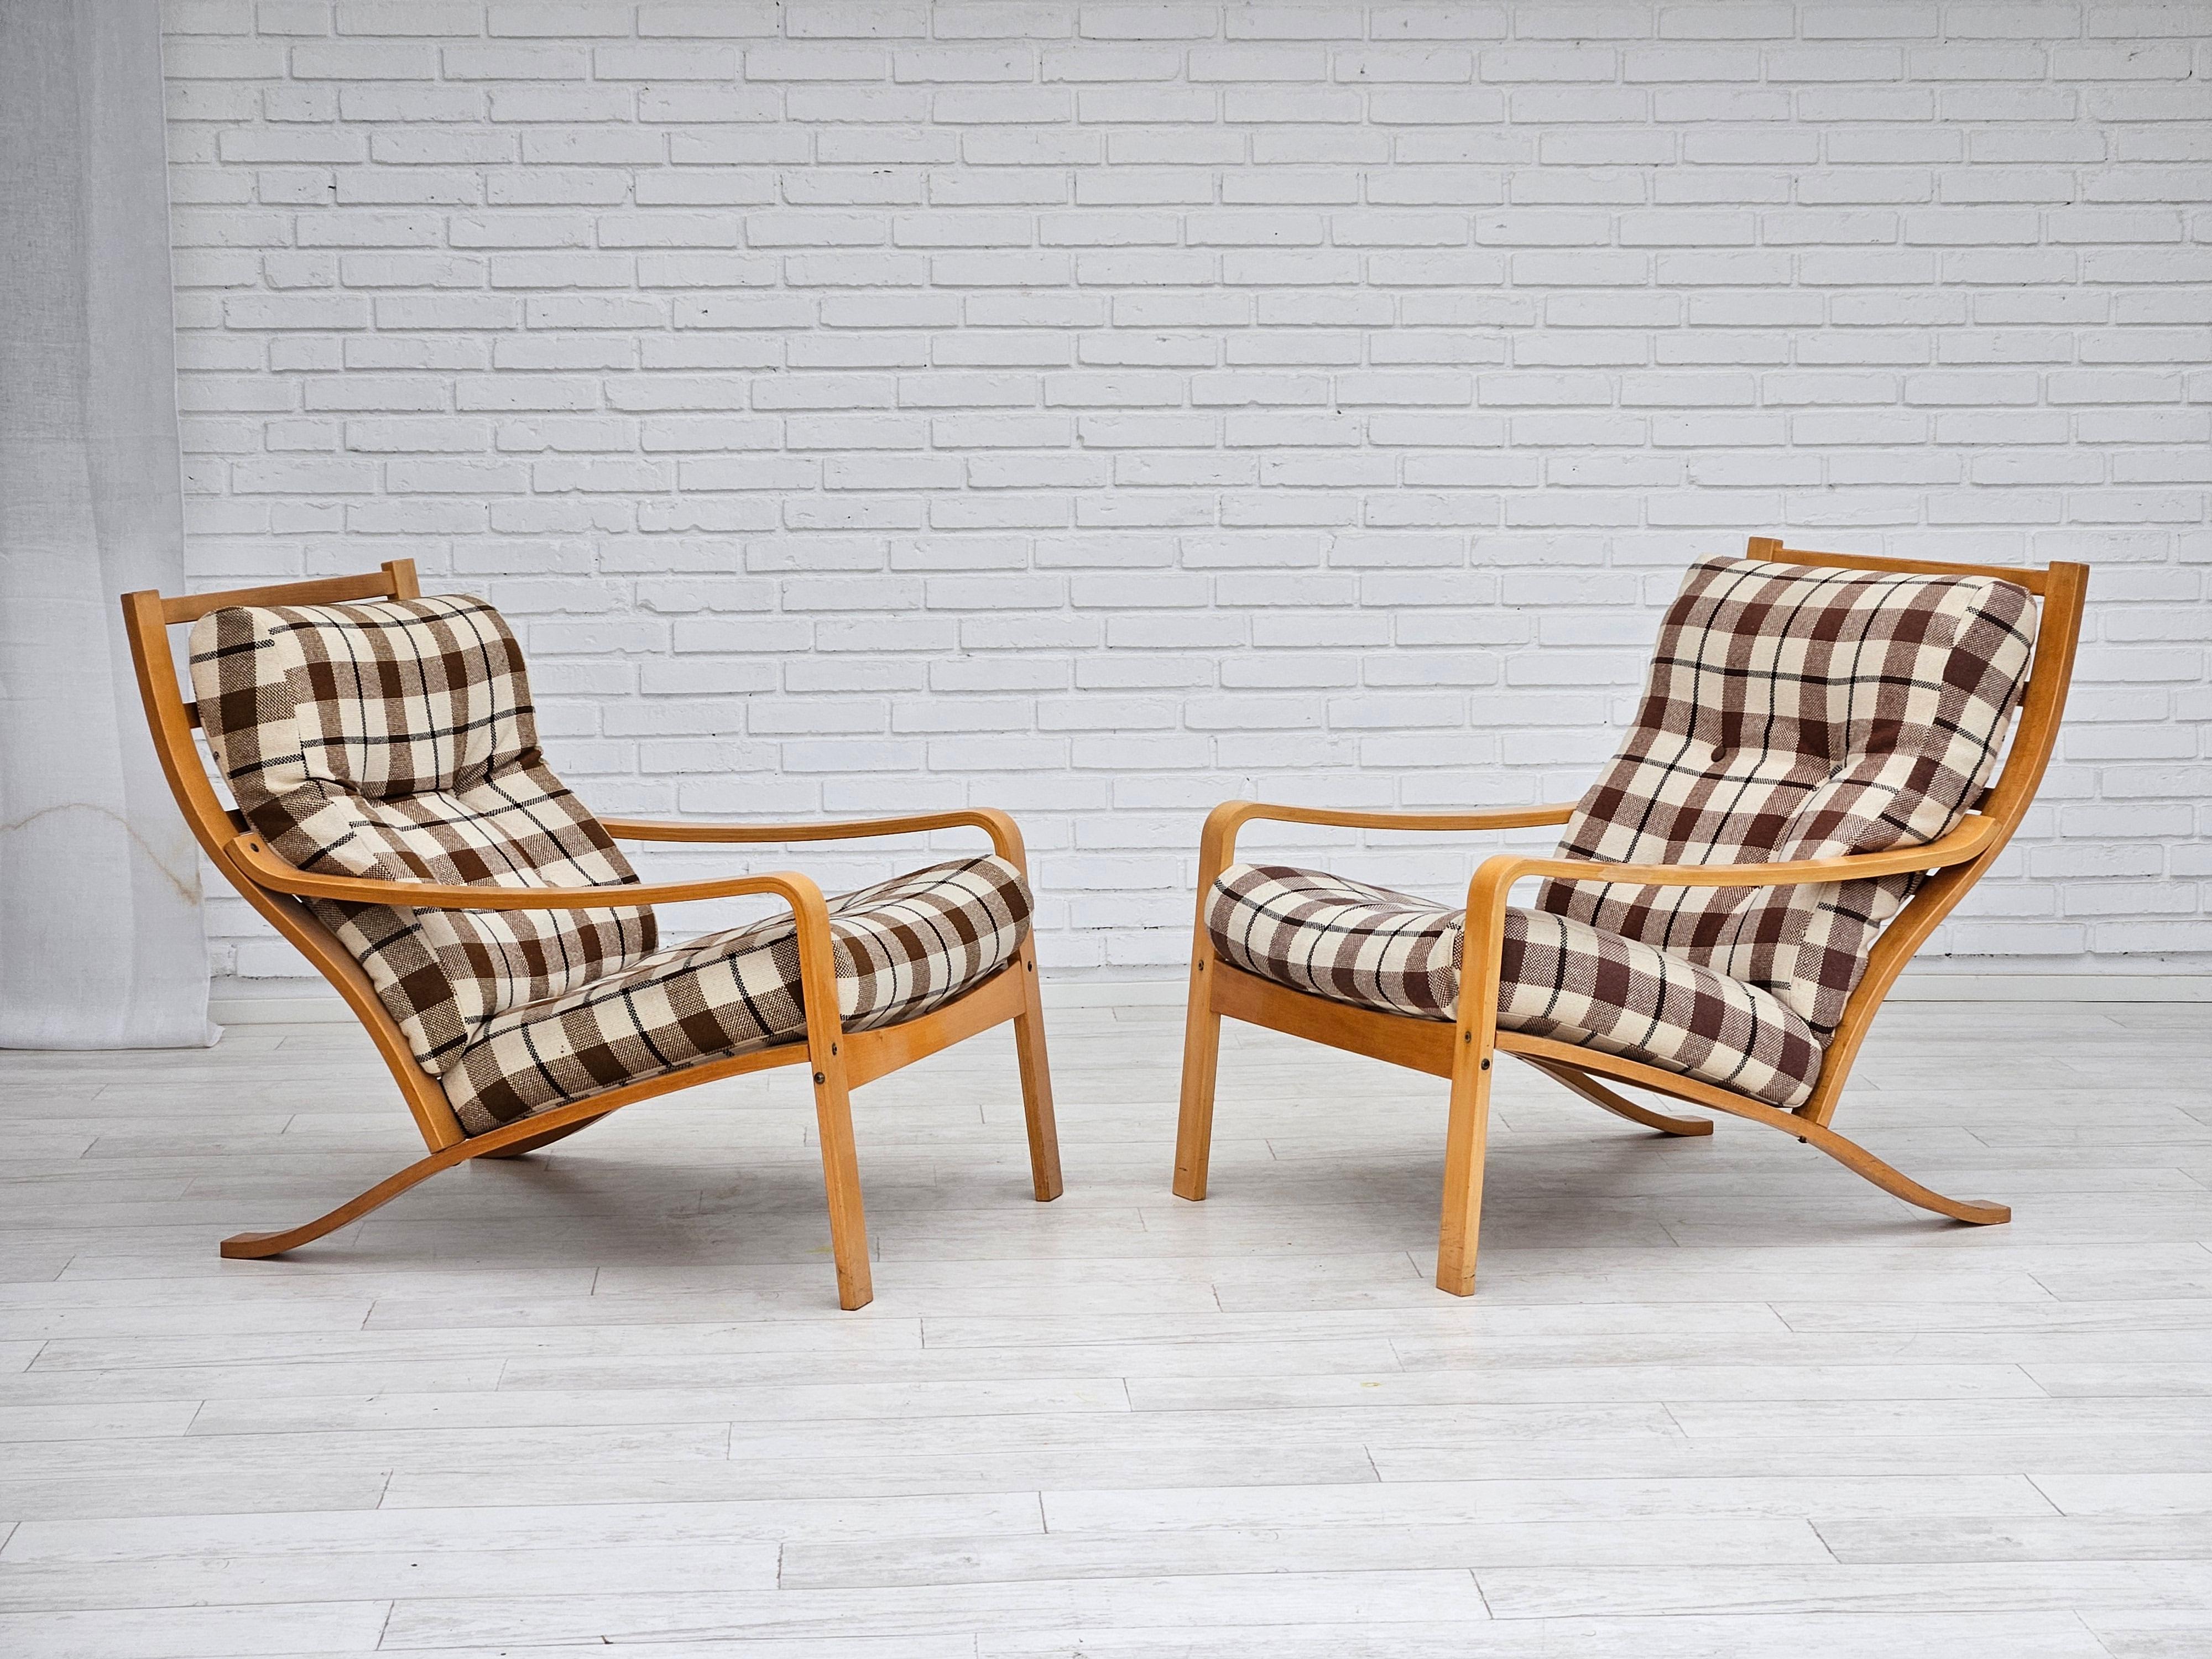 1970s, Danish design. Par of two lounge chairs in beige/brown furniture wool. Bent beech wood. Removable seat cushion. Original very good condition: no smells and no stains. Manufactured by Danish furniture manufacturer in about 1970.